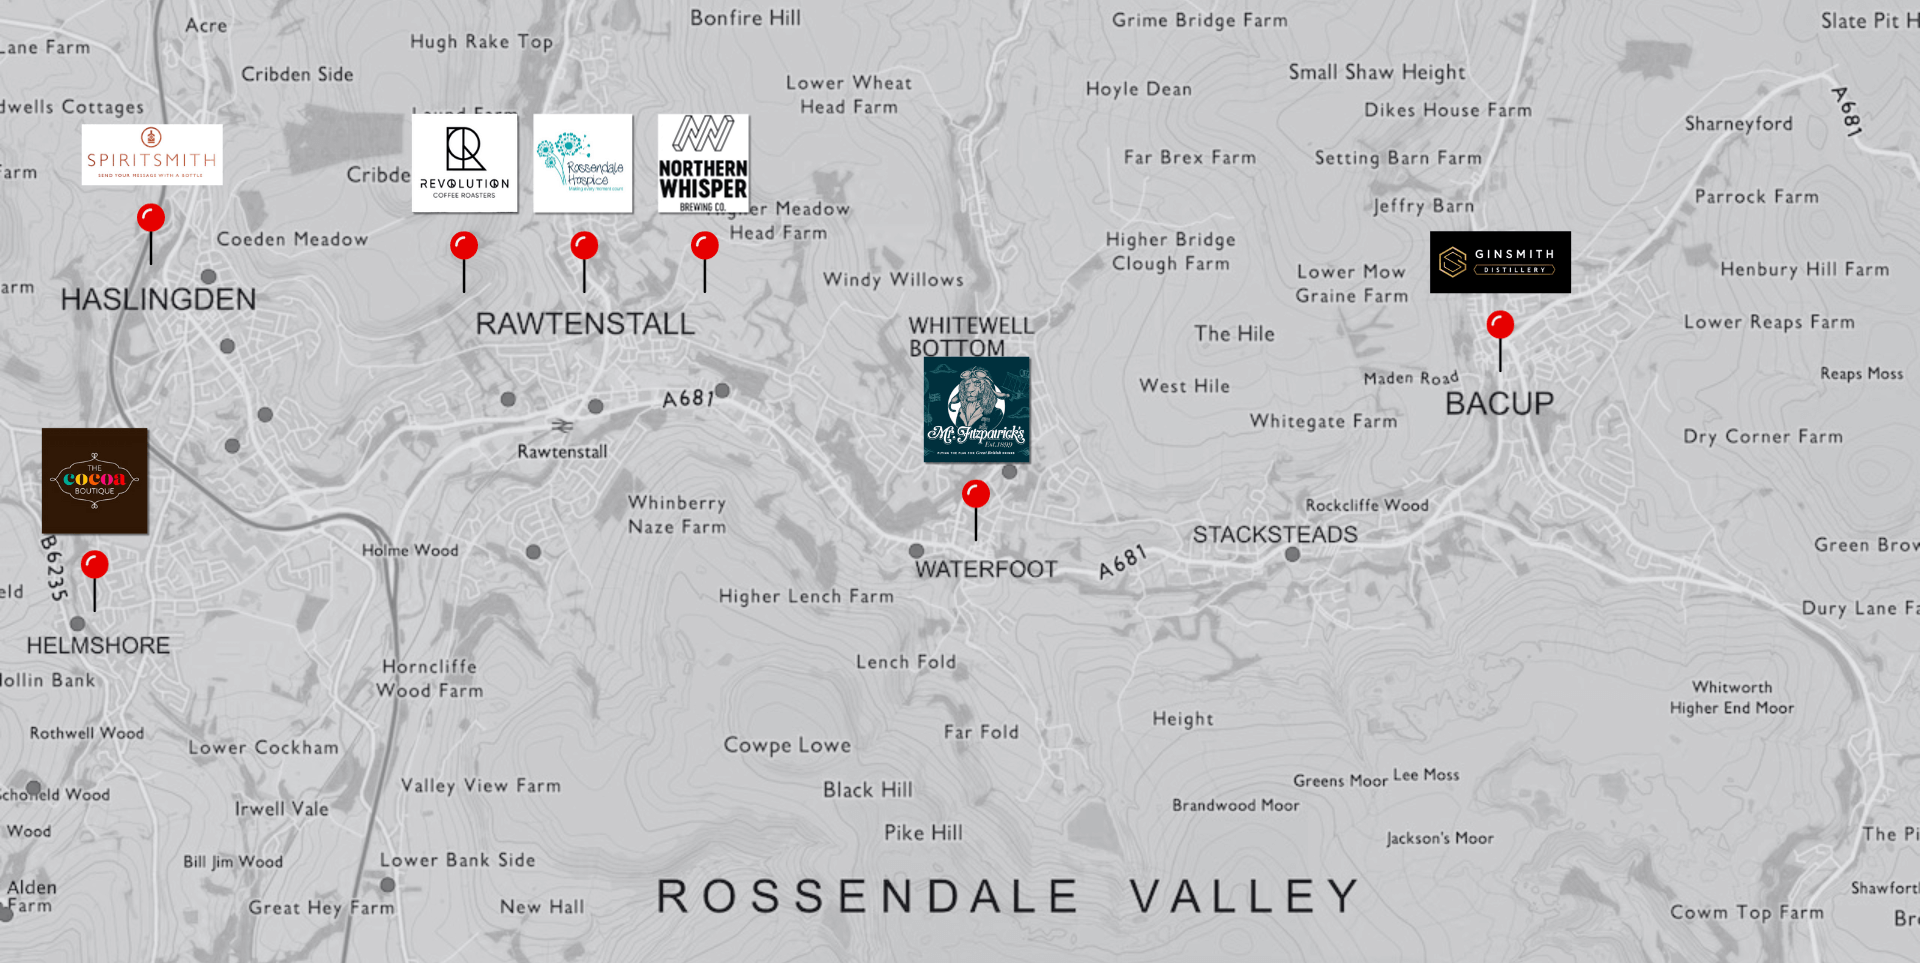 Where you will find all the producers in Rossendale - map of locations